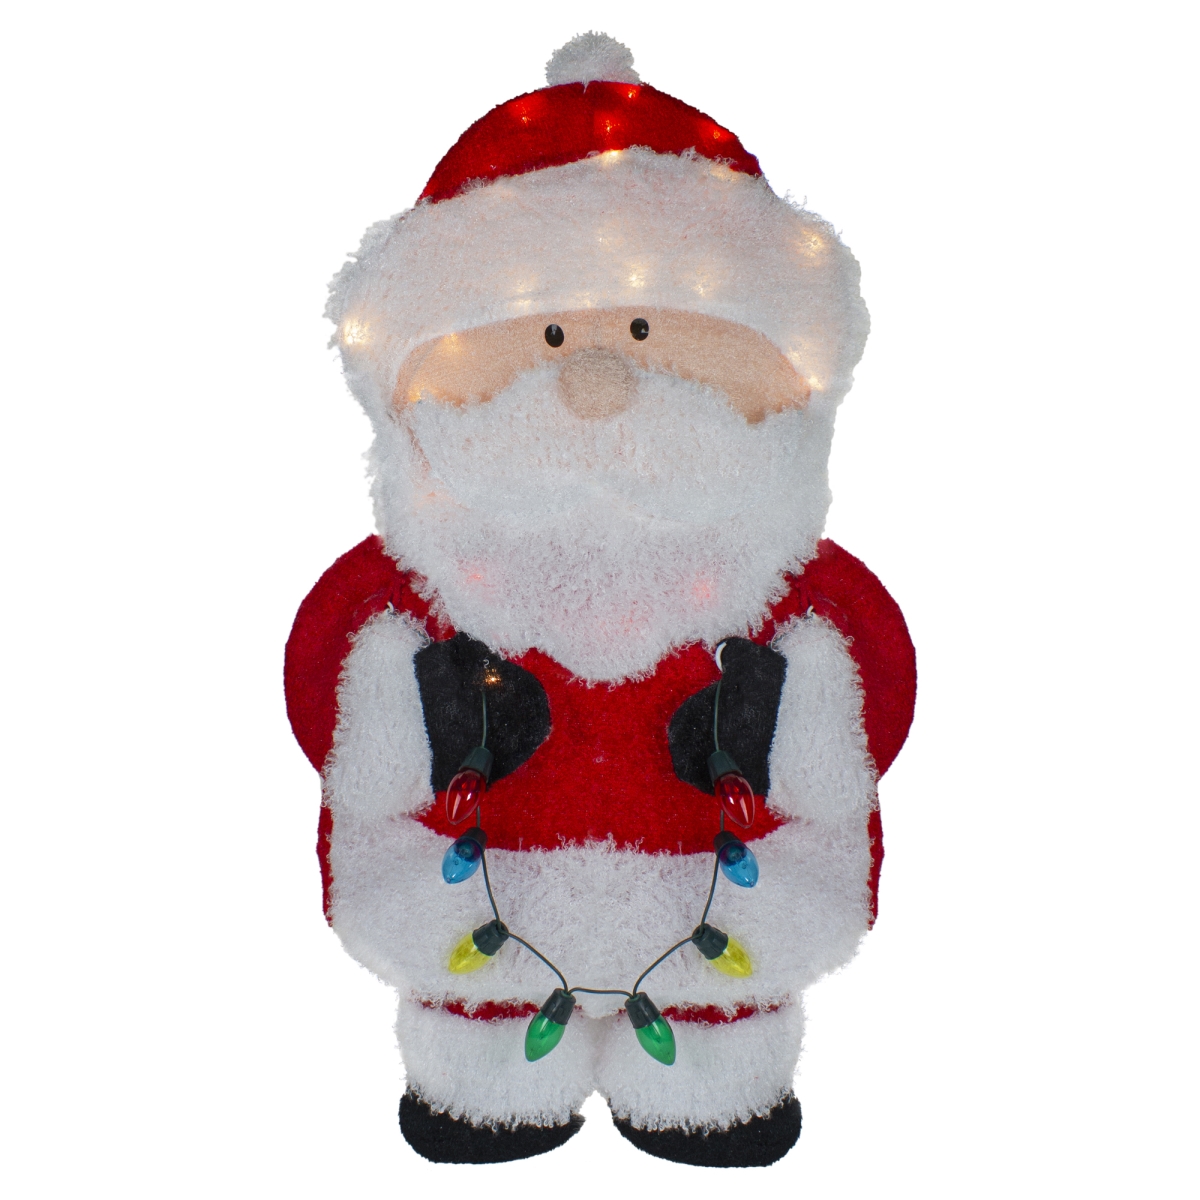 Go-Go 32 x 16 x 3 in. Lighted Chenille Santa with Lights Outdoor Christmas Decoration